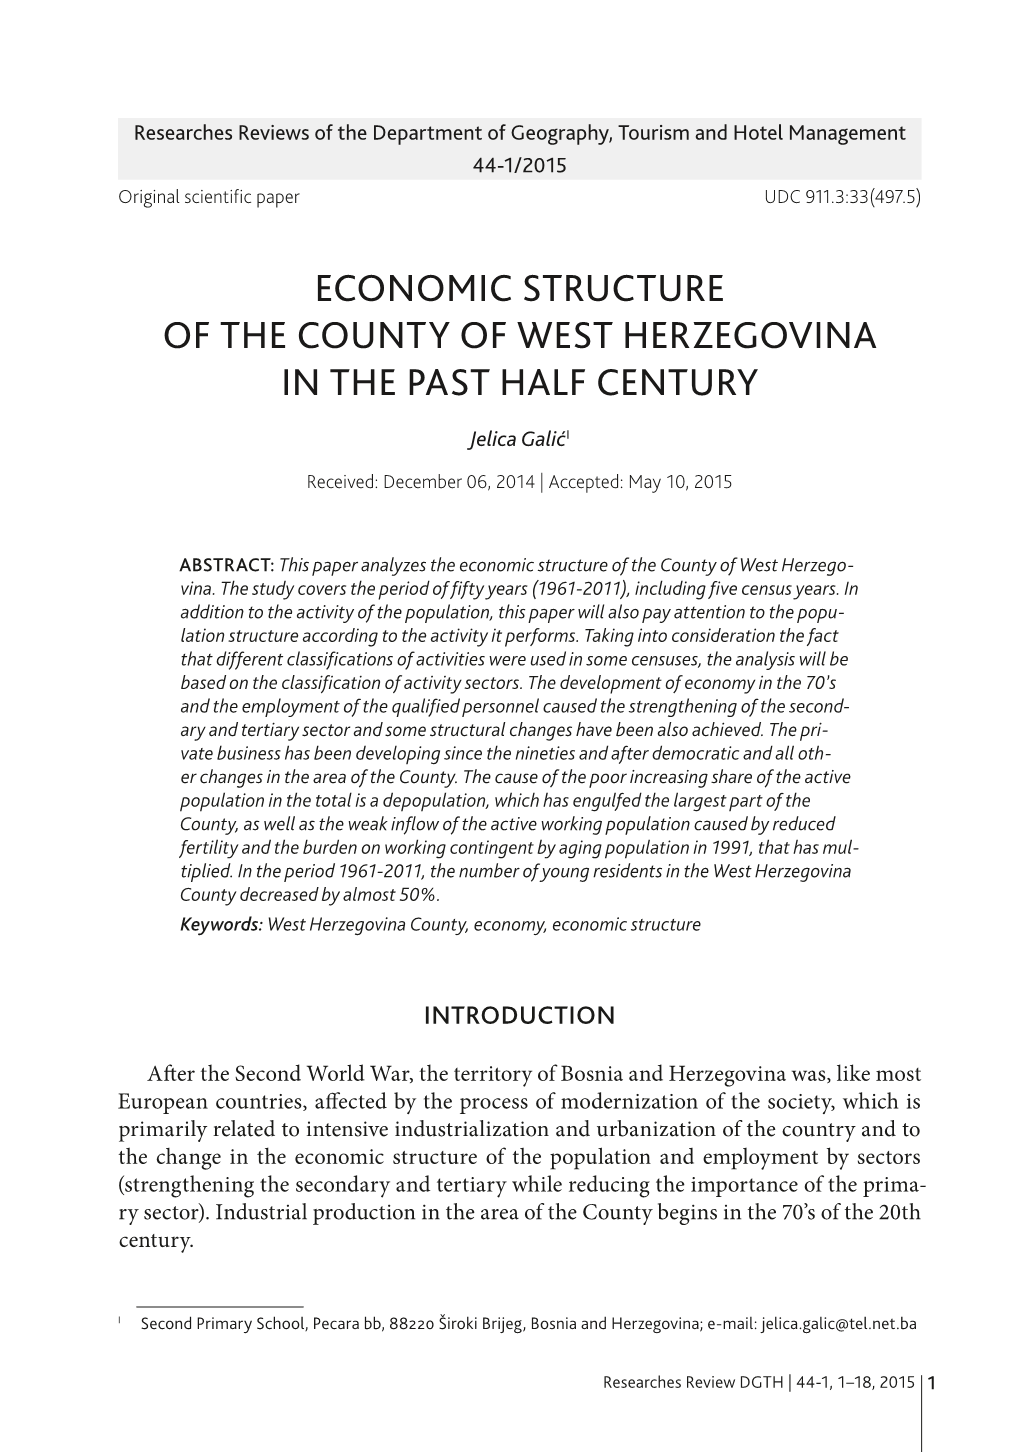 Economic Structure of the County of West Herzegovina in the Past Half Century